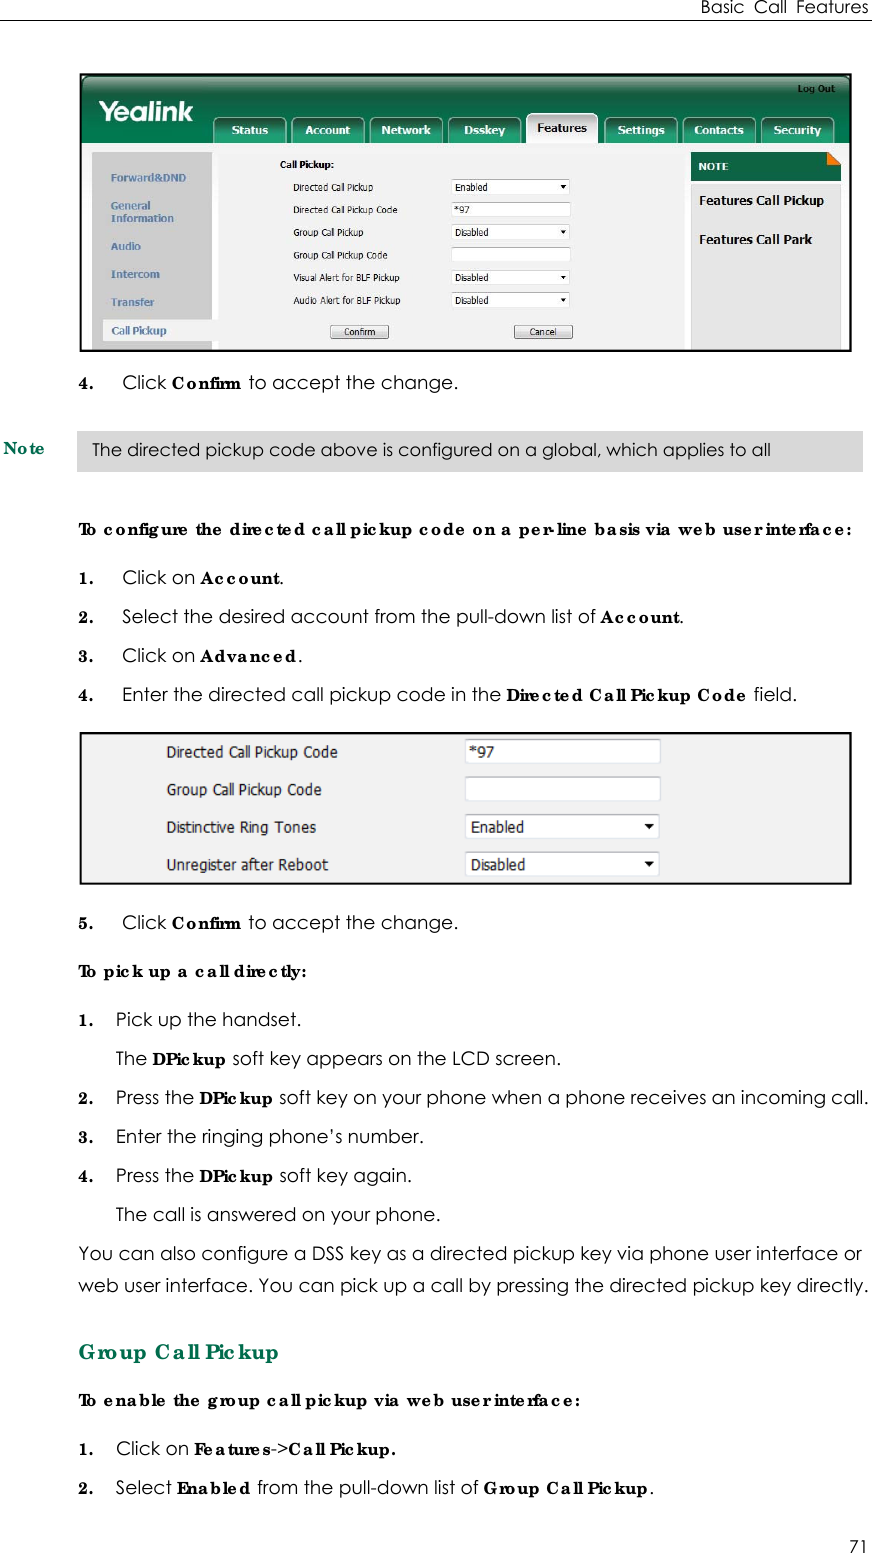 Basic Call Features 71  4. Click Confirm to accept the change. Note To configure the directed call pickup code on a per-line basis via web user interface: 1. Click on Account. 2. Select the desired account from the pull-down list of Account. 3. Click on Advanced. 4. Enter the directed call pickup code in the Directed Call Pickup Code field.  5. Click Confirm to accept the change. To pick up a call directly:   1. Pick up the handset. The DPickup soft key appears on the LCD screen. 2. Press the DPickup soft key on your phone when a phone receives an incoming call. 3. Enter the ringing phone’s number. 4. Press the DPickup soft key again. The call is answered on your phone. You can also configure a DSS key as a directed pickup key via phone user interface or web user interface. You can pick up a call by pressing the directed pickup key directly. Group Call Pickup To enable the group call pickup via web user interface: 1. Click on Features-&gt;Call Pickup. 2. Select Enabled from the pull-down list of Group Call Pickup. The directed pickup code above is configured on a global, which applies to all 